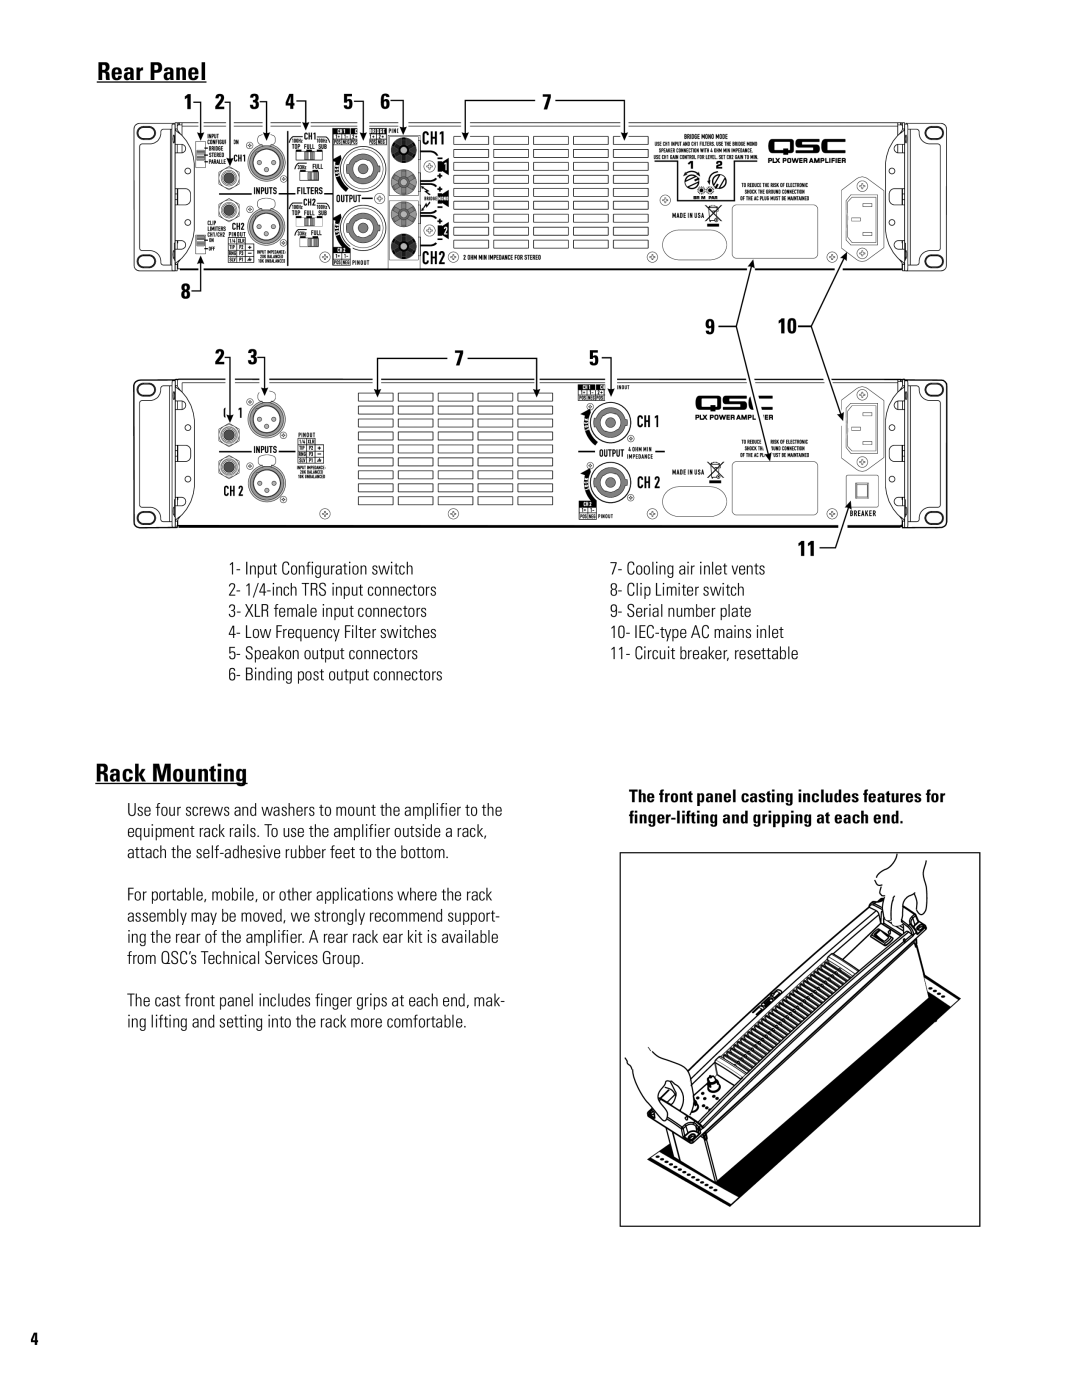 QSC Audio PLX 1104 Rear Panel, Rack Mounting, Input Configuration switch, Cooling air inlet vents, Clip Limiter switch 